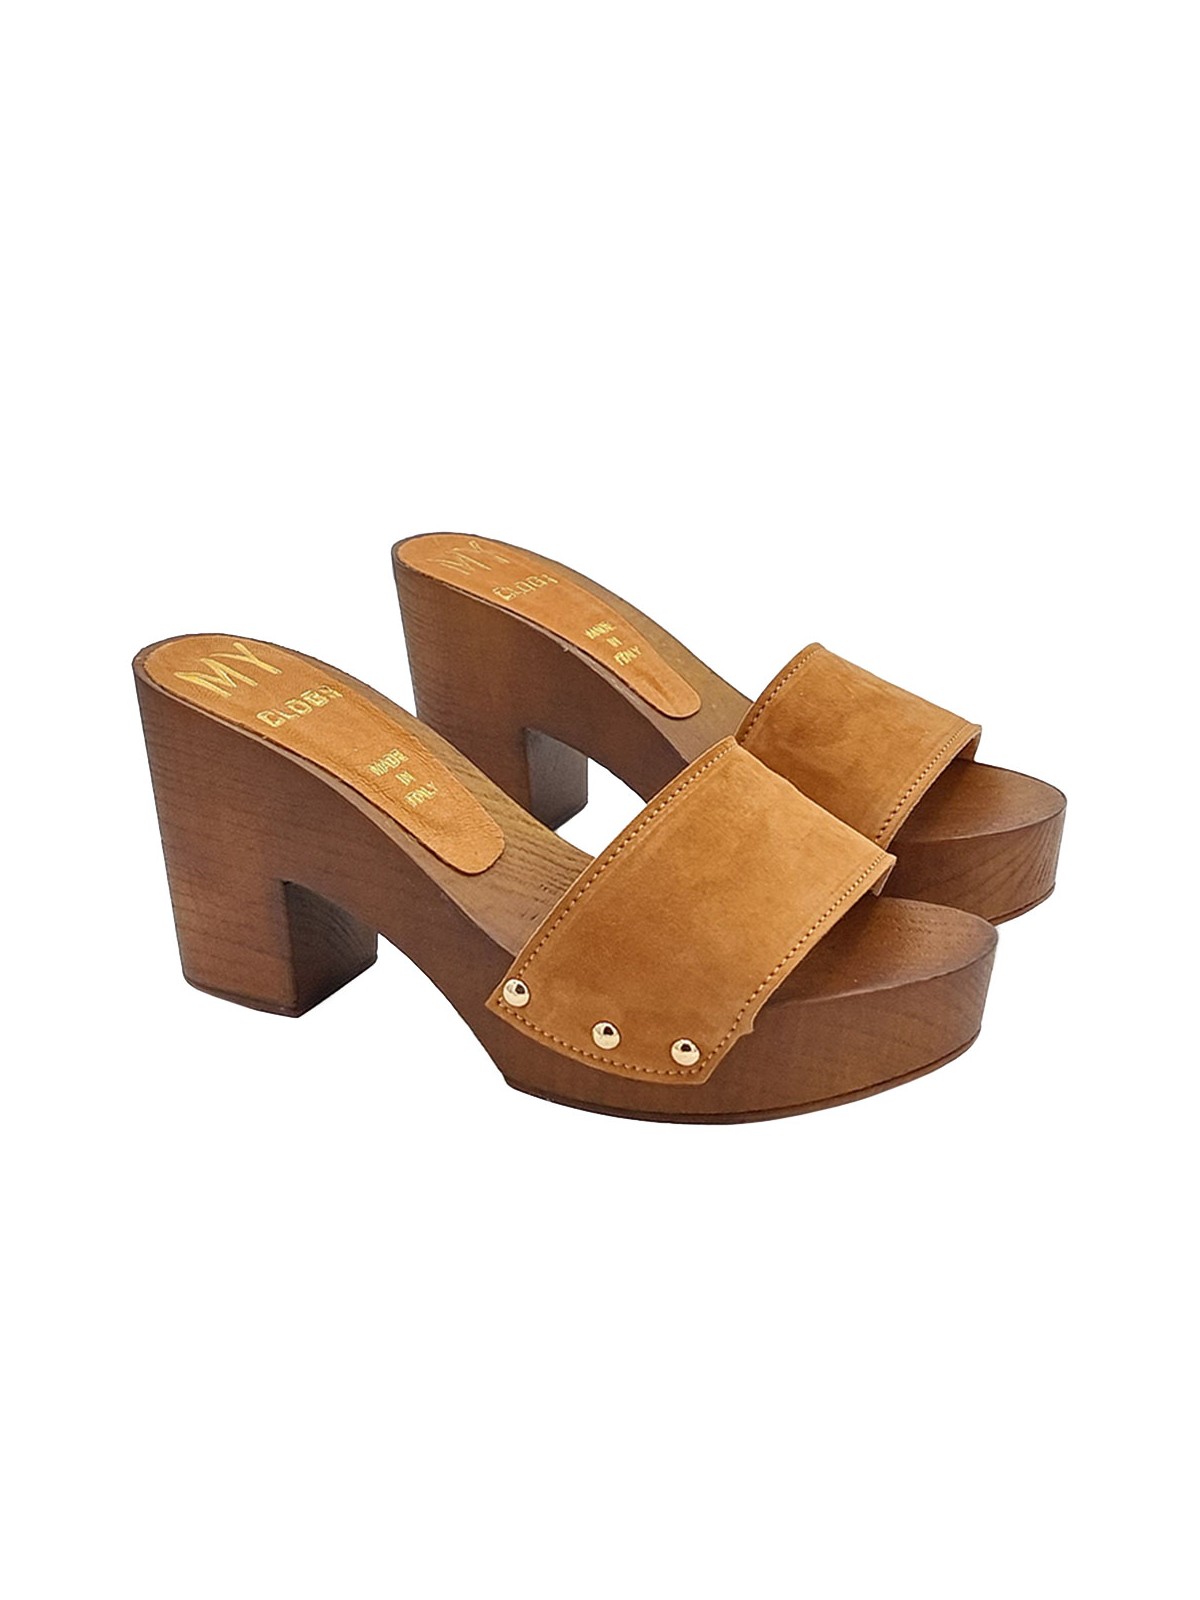 Clogs in Light Brown Suede with Heel 9